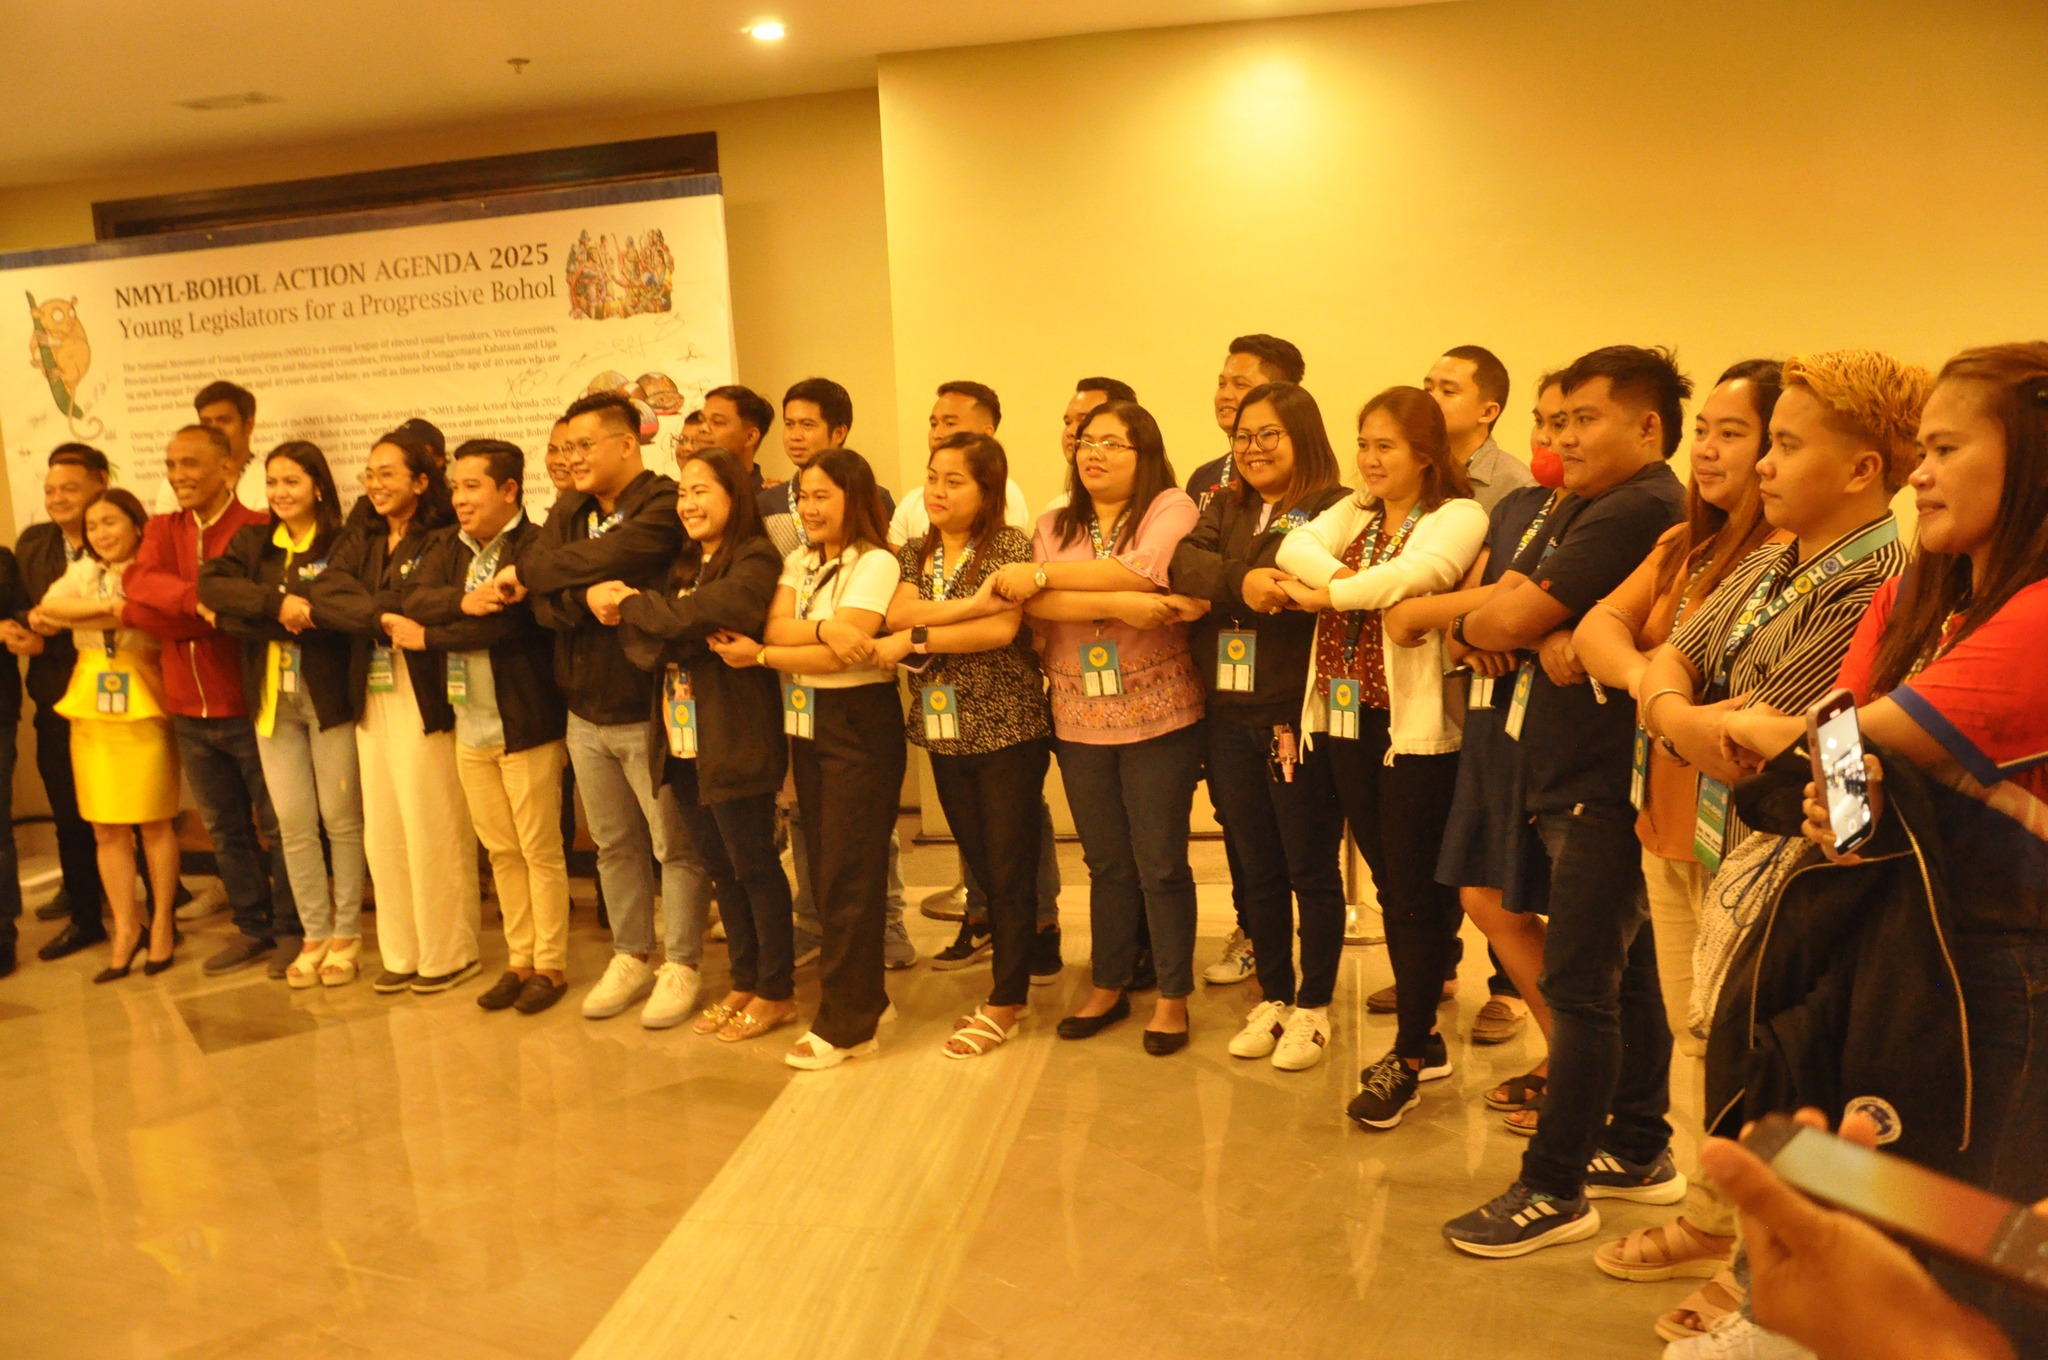 PIA - NMYL Bohol vows to support youth agenda